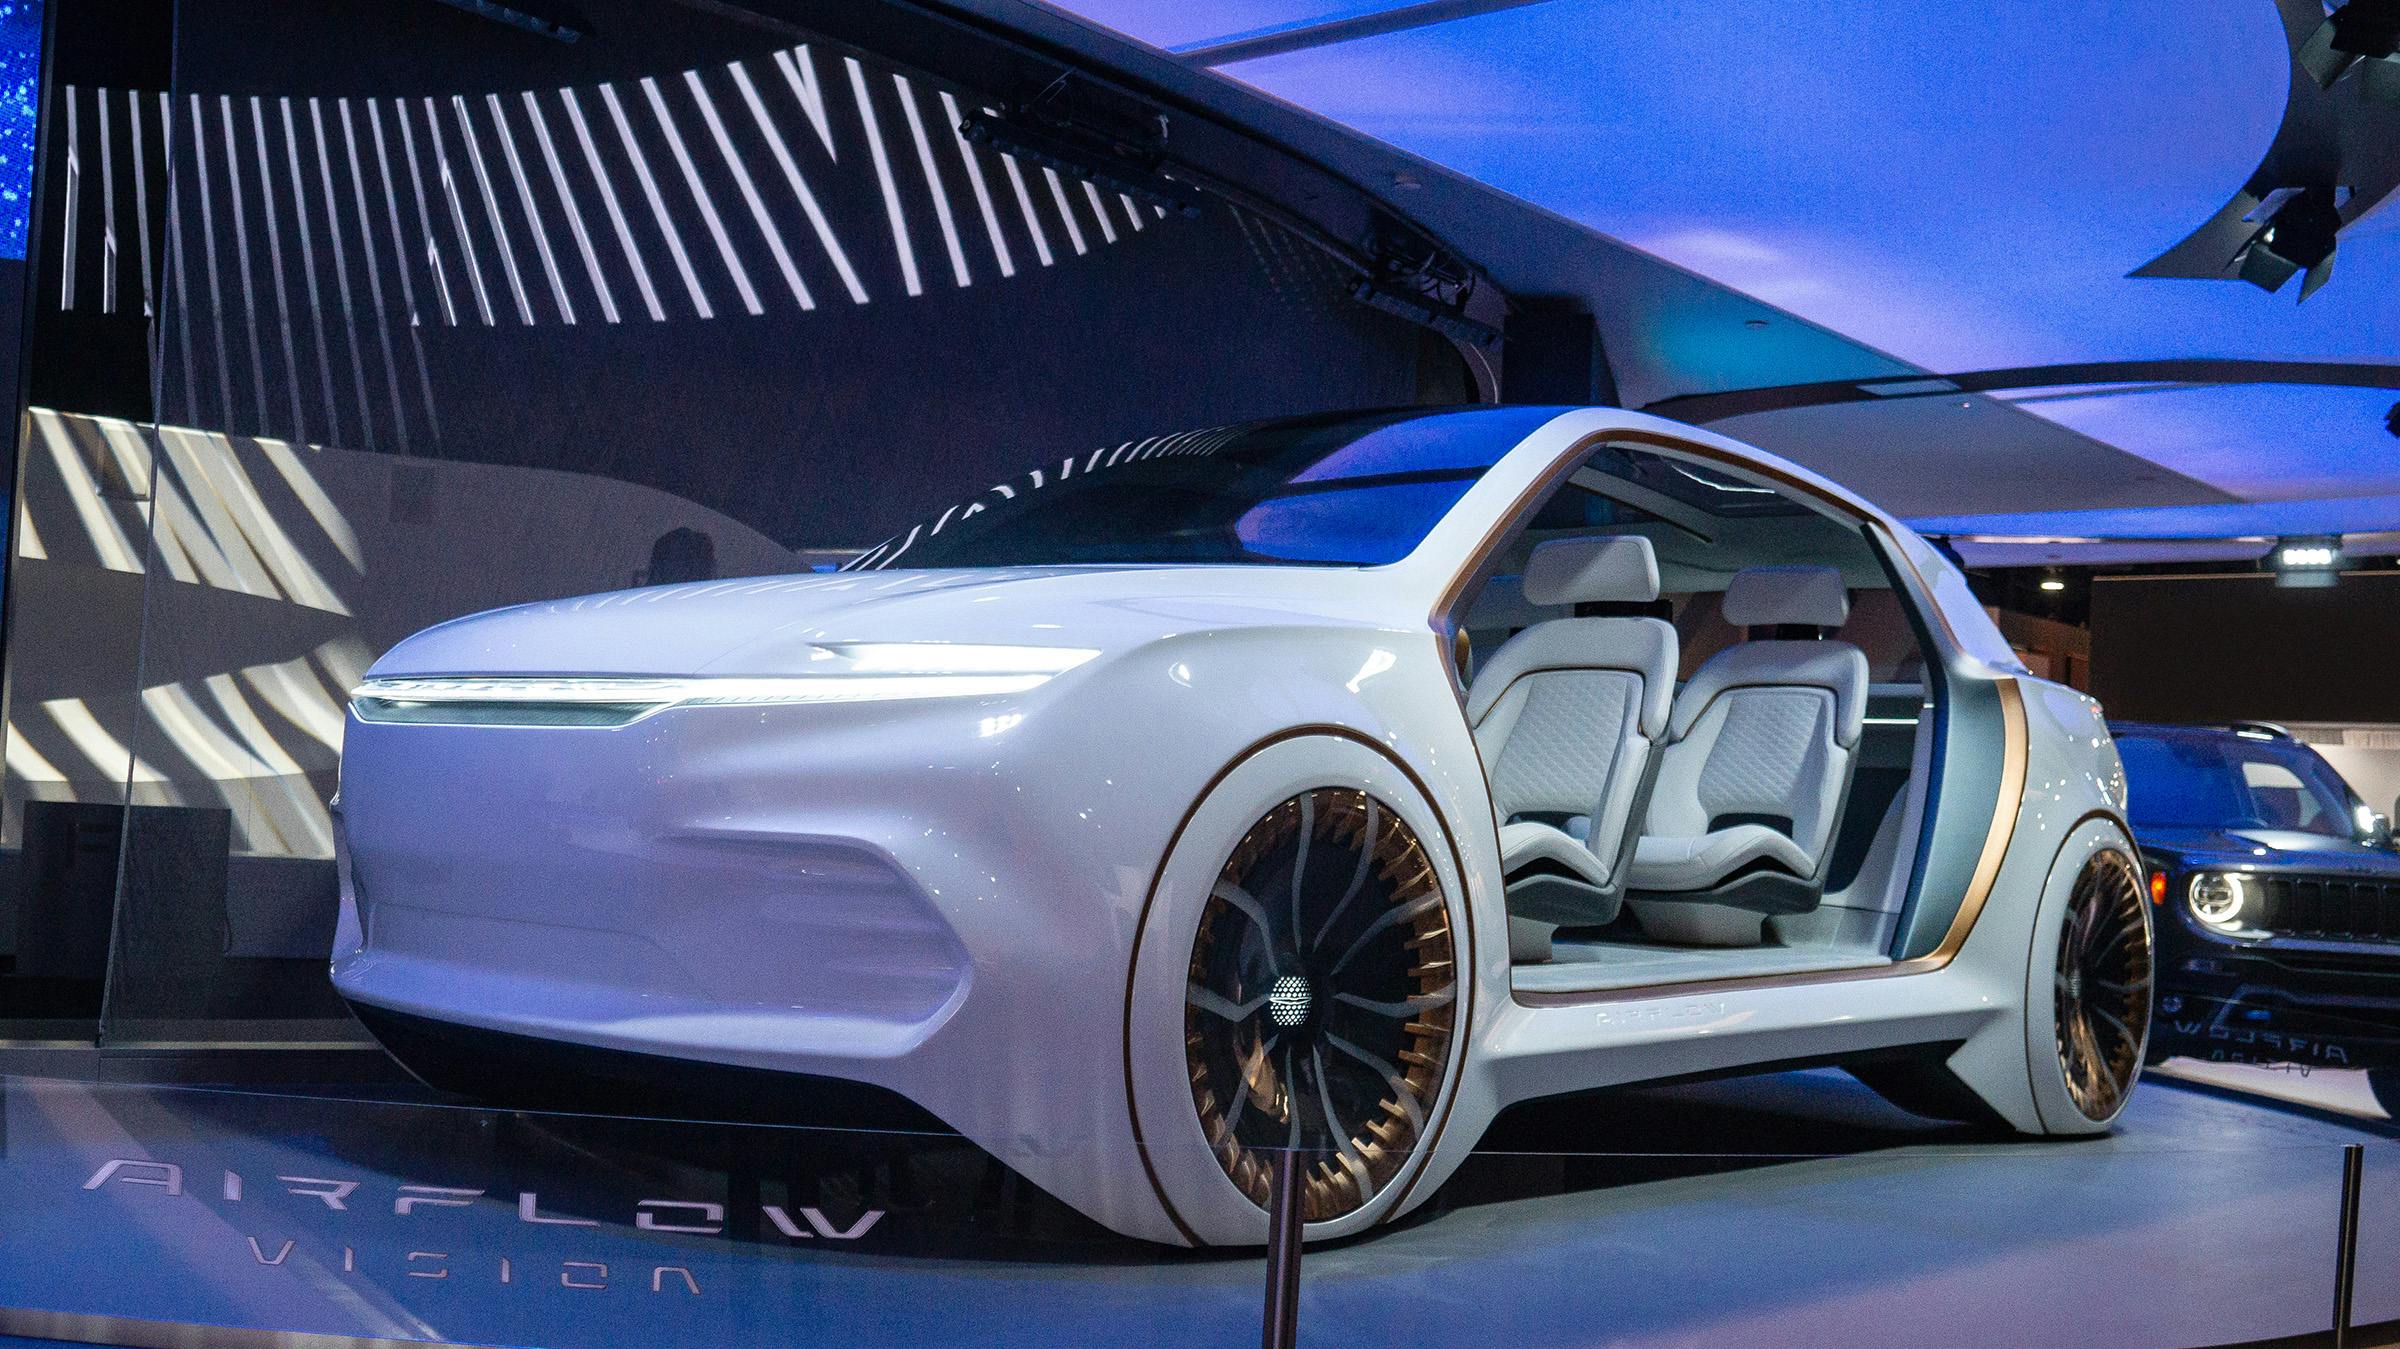 2020 Airflow Vision front